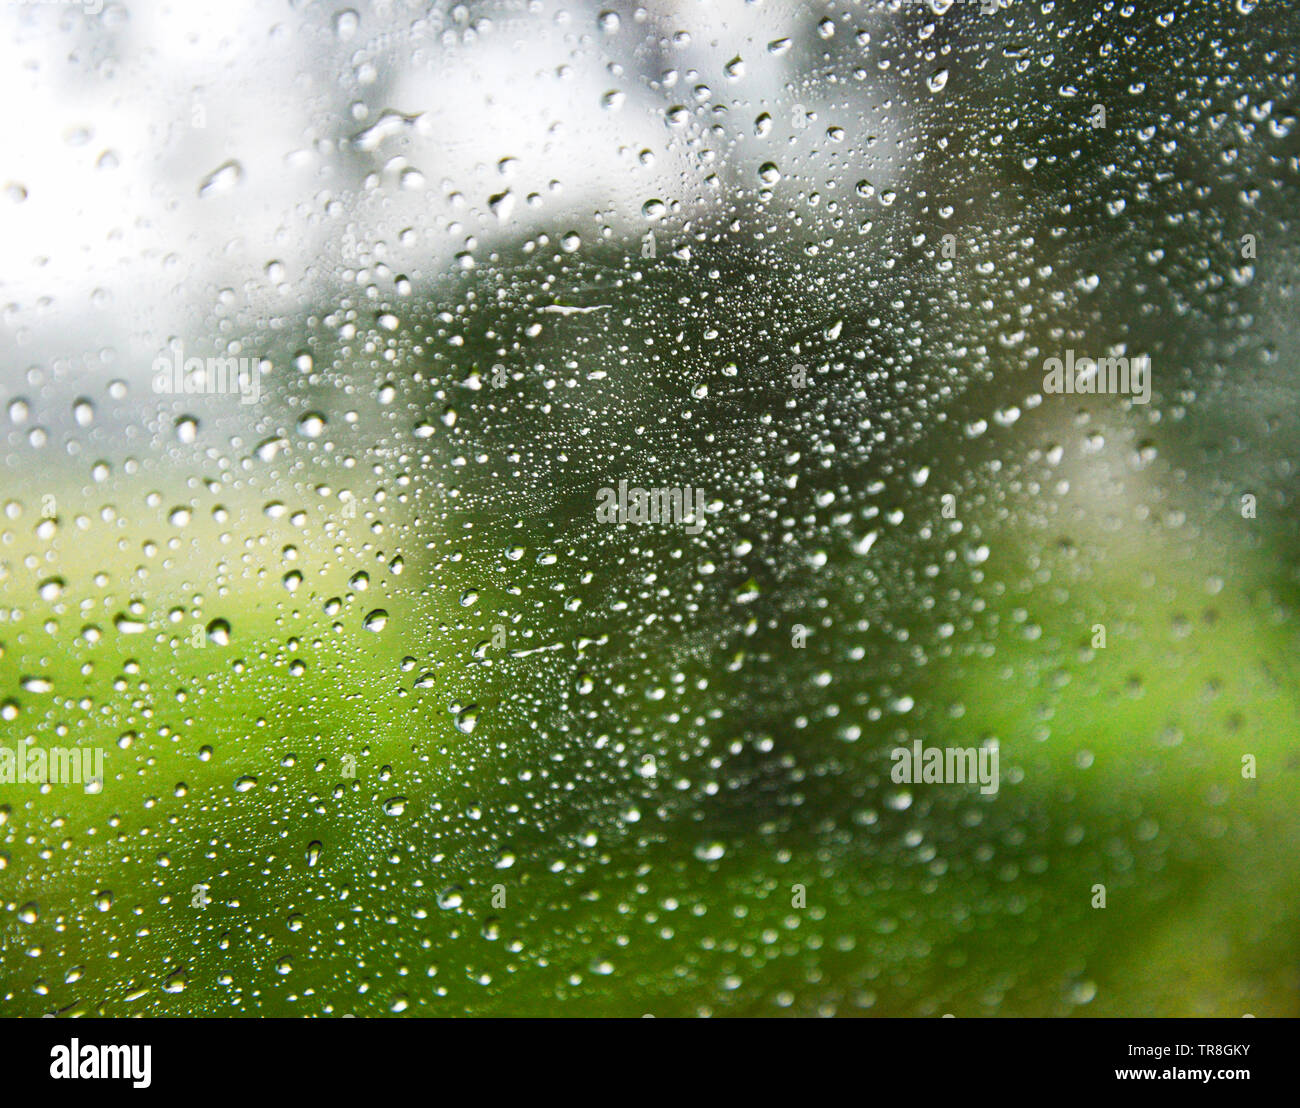 Rain drops on glass / Rainy day window glass with water drops and nature blur background Stock Photo